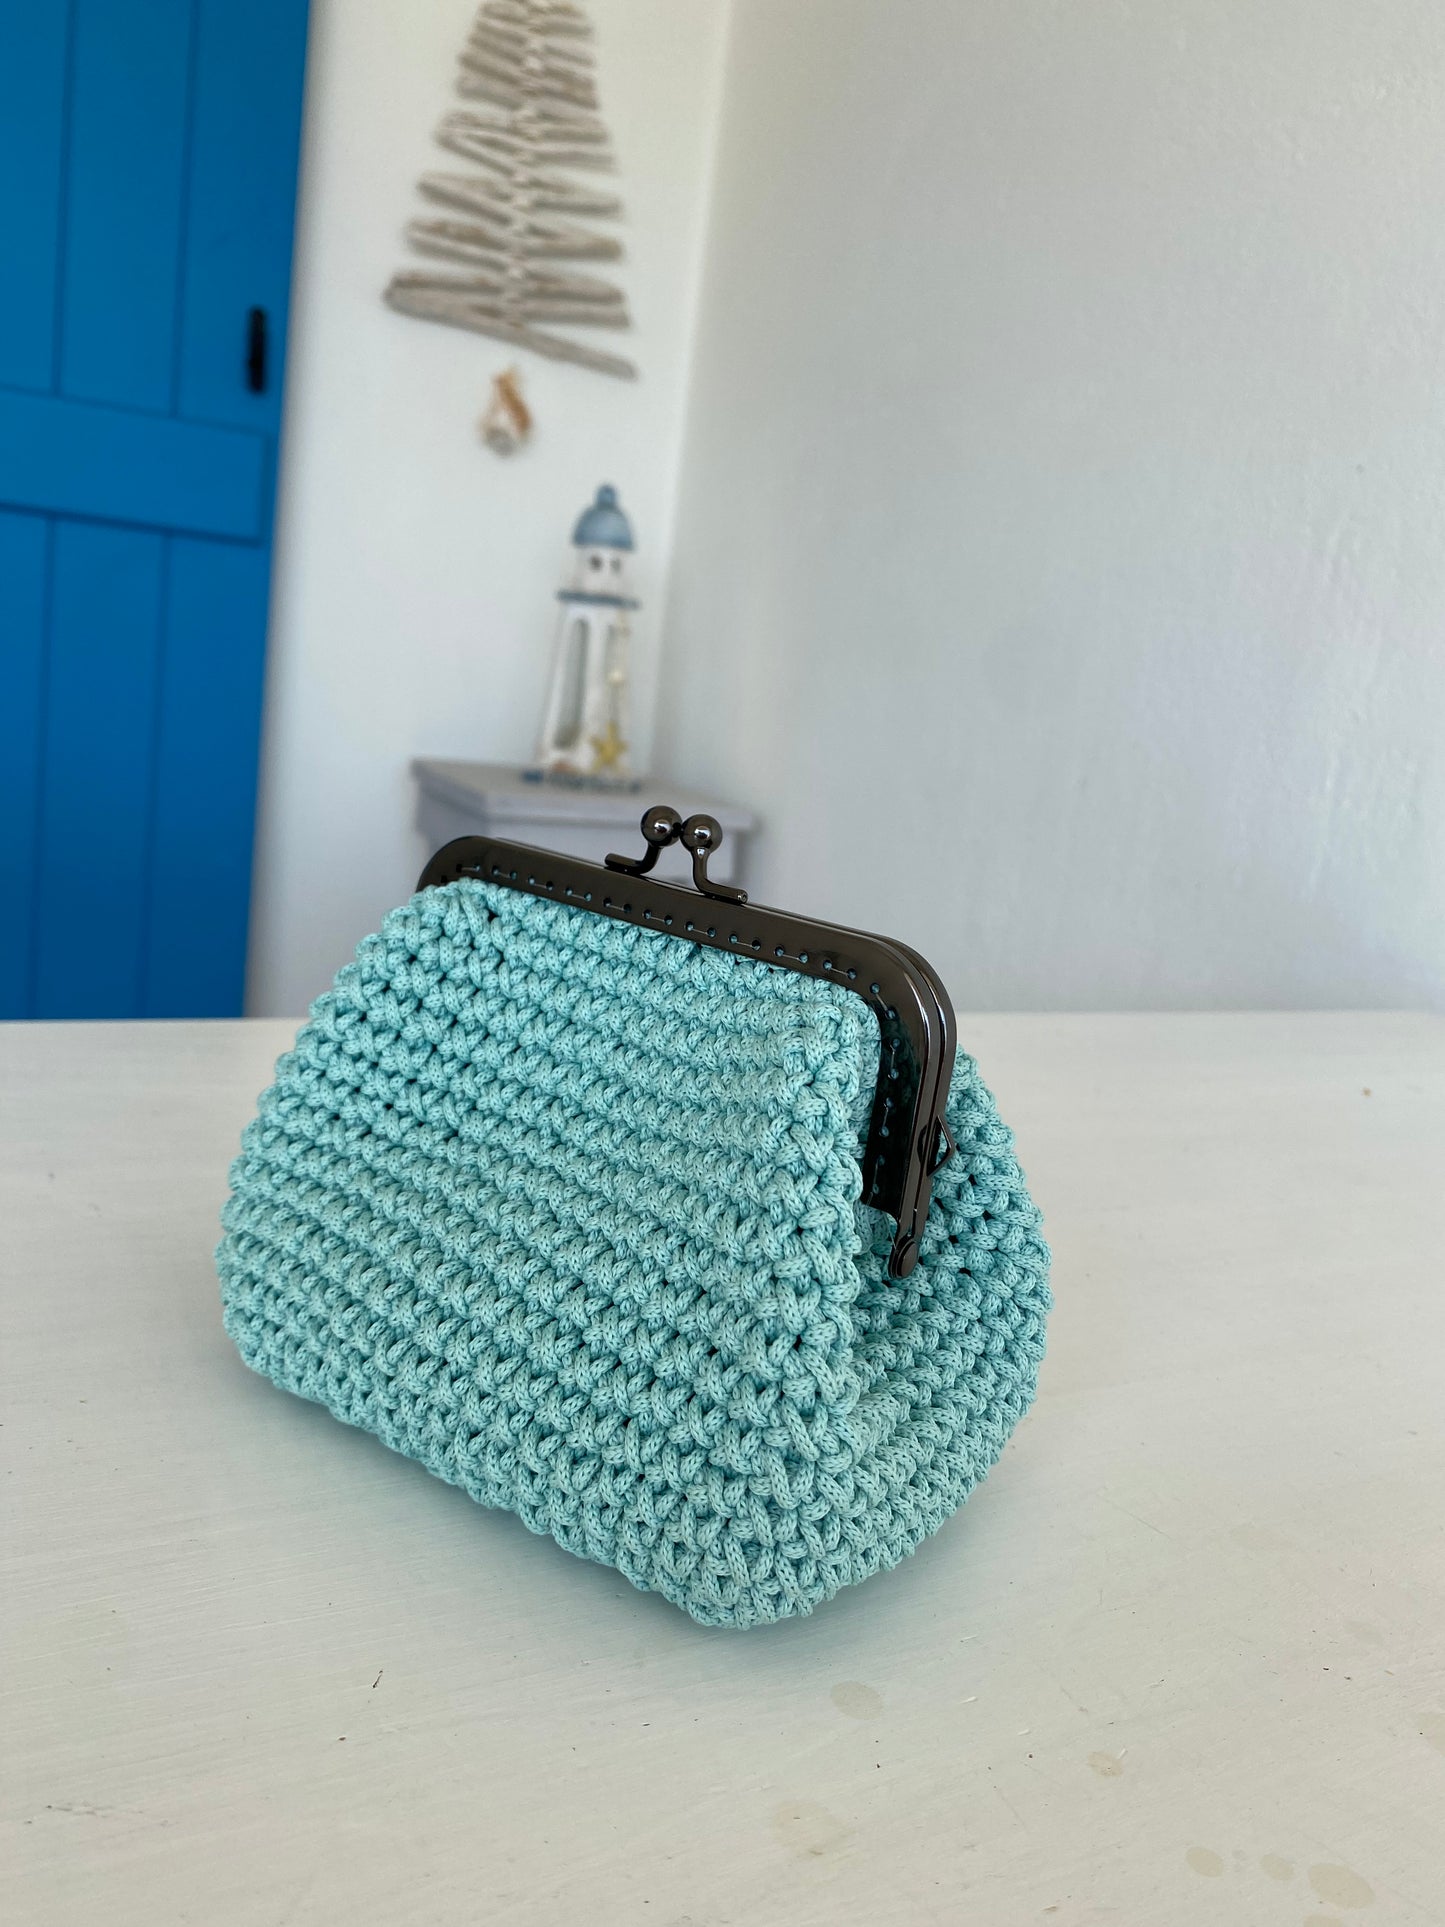 Make-up pouch with metal frame closure